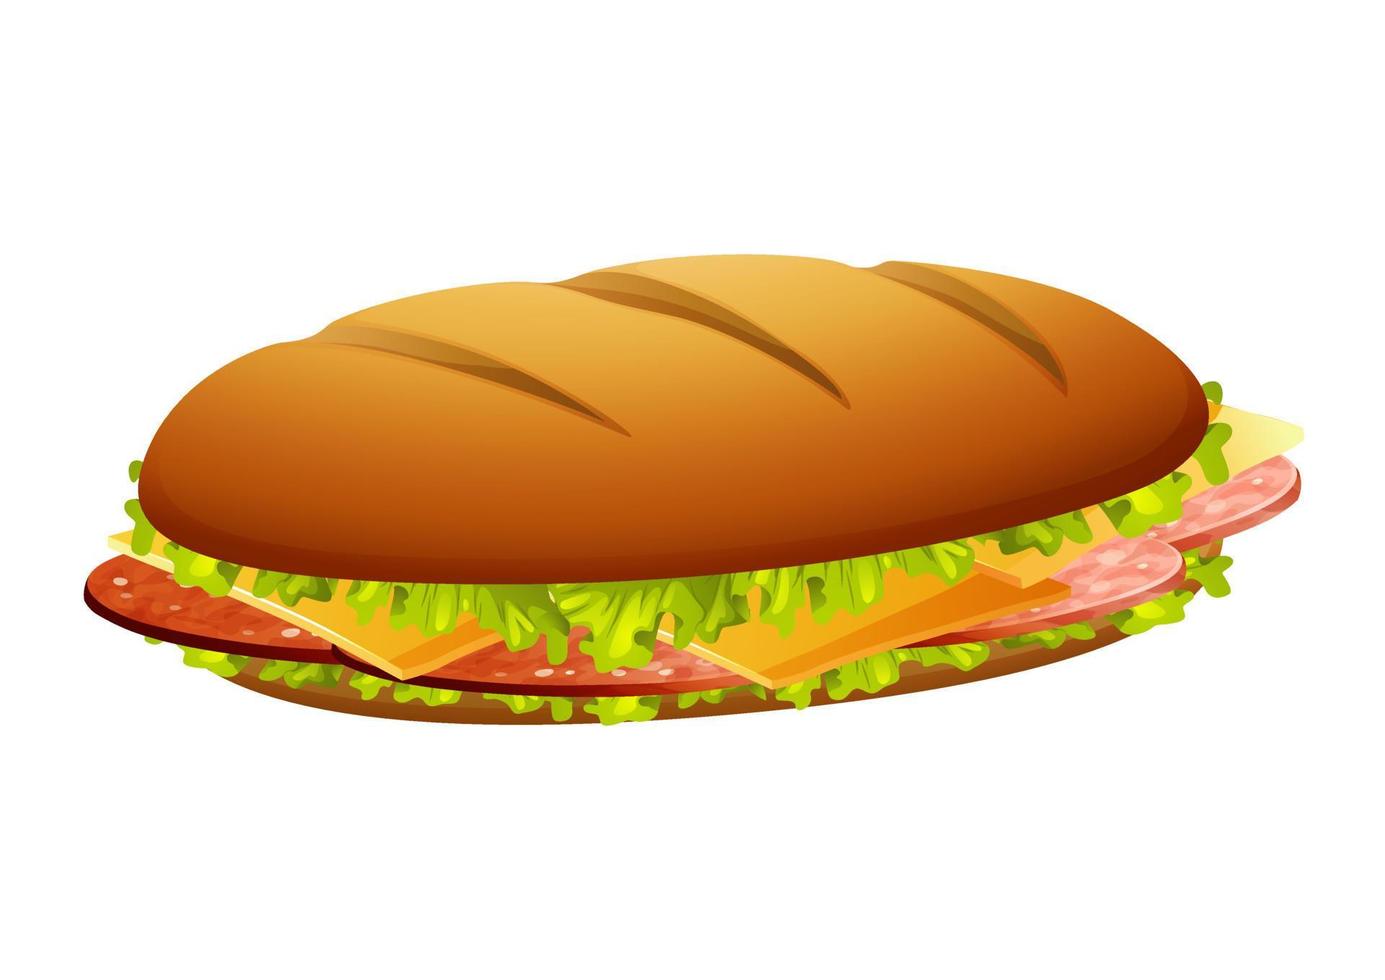 Vector illustration of salami sandwich on a white background. Bread, slices of salami, cheese and lettuce